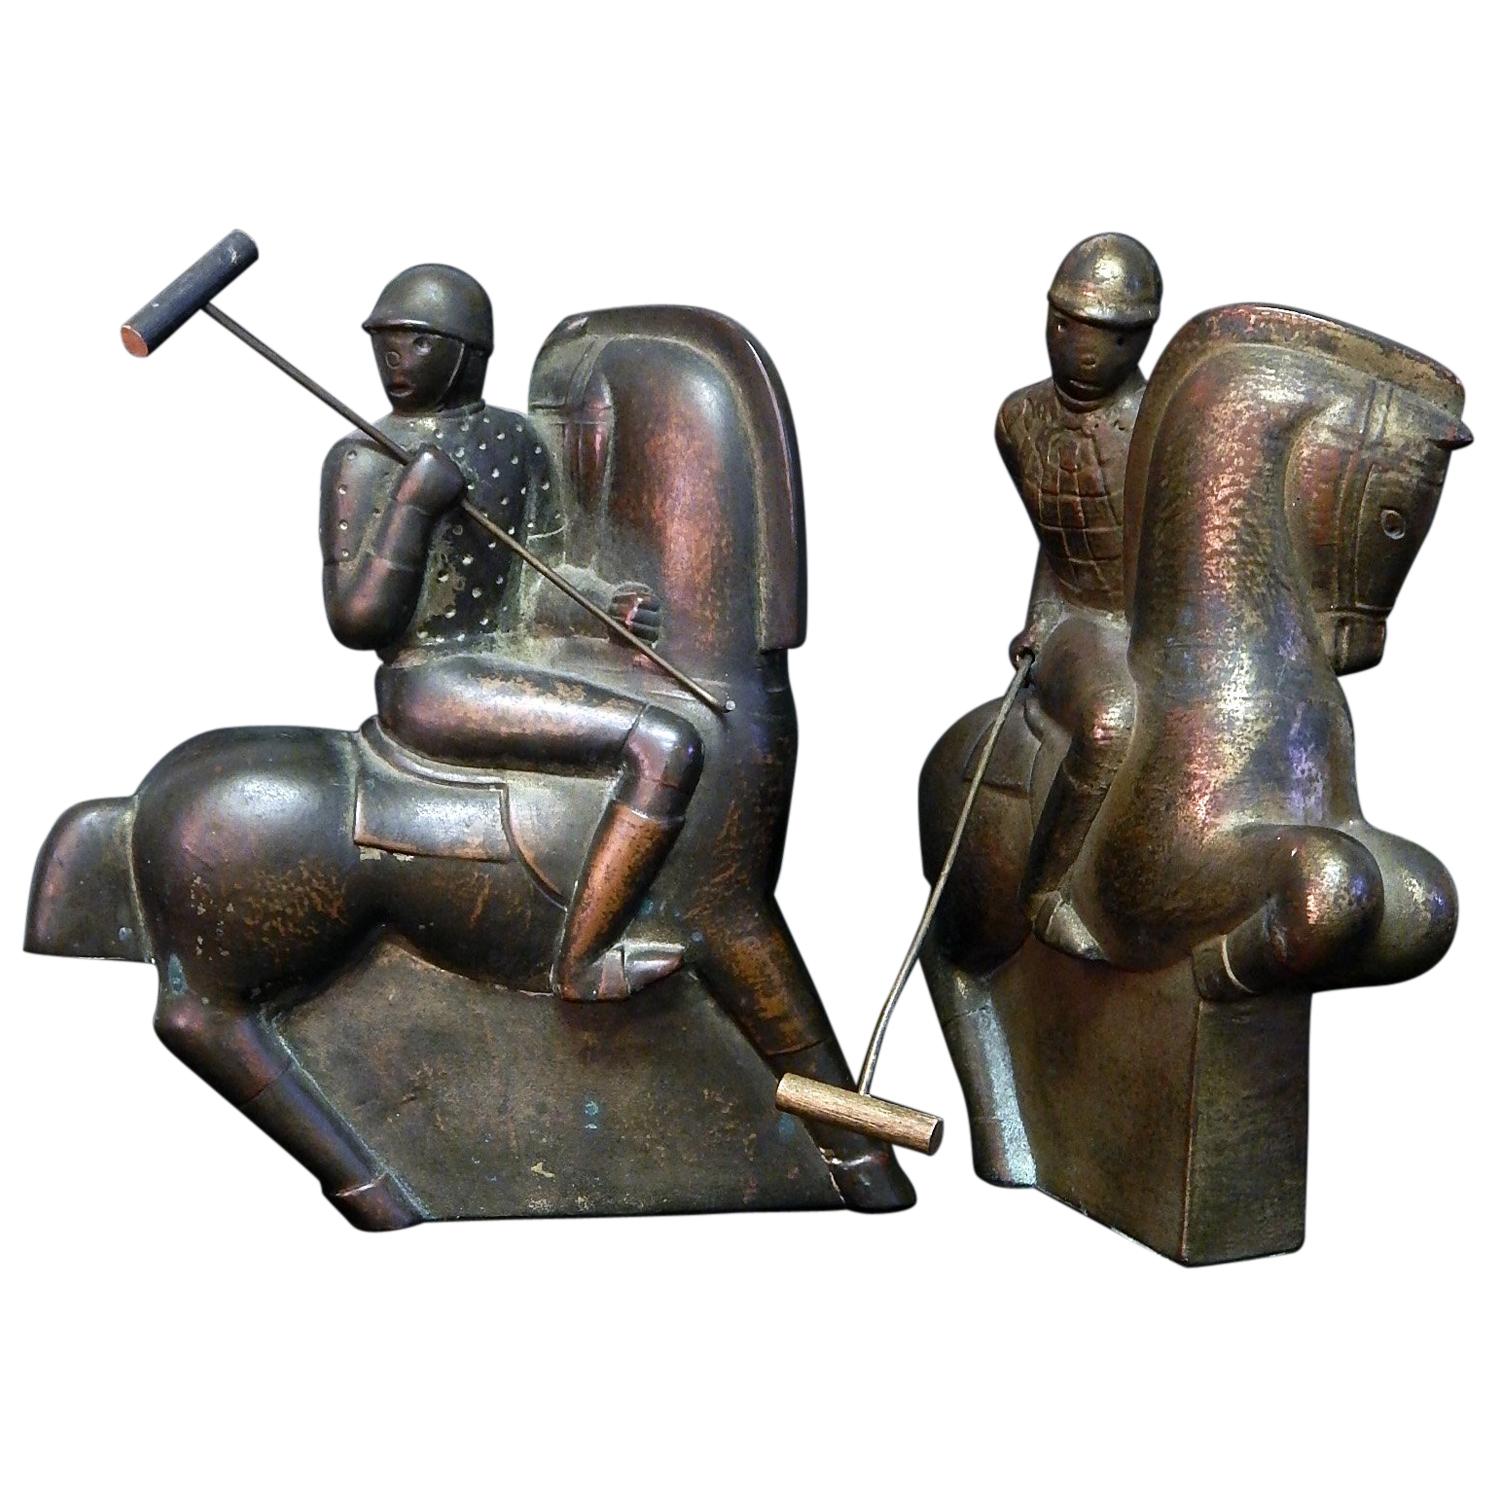 Pair of Polo Players, Rare and Striking Art Deco Sculptures by Gregory